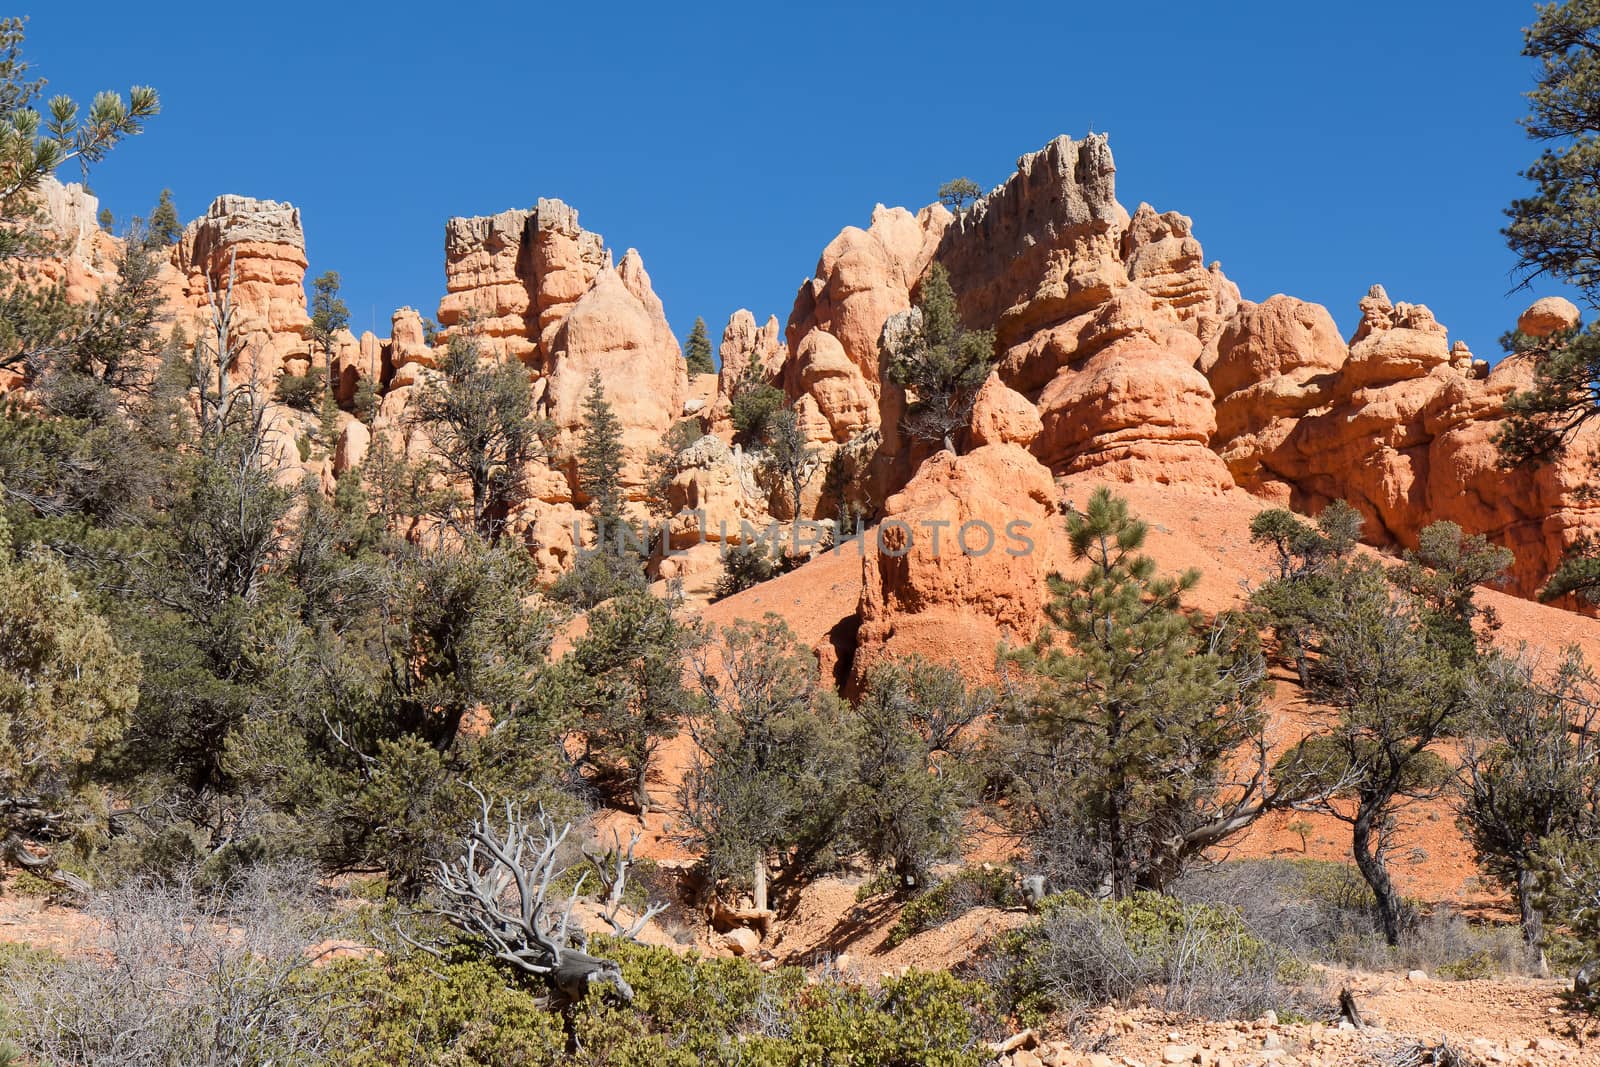 This image shows some of the many shapes and colors of the formations at Red Canyon State Park in Utah.